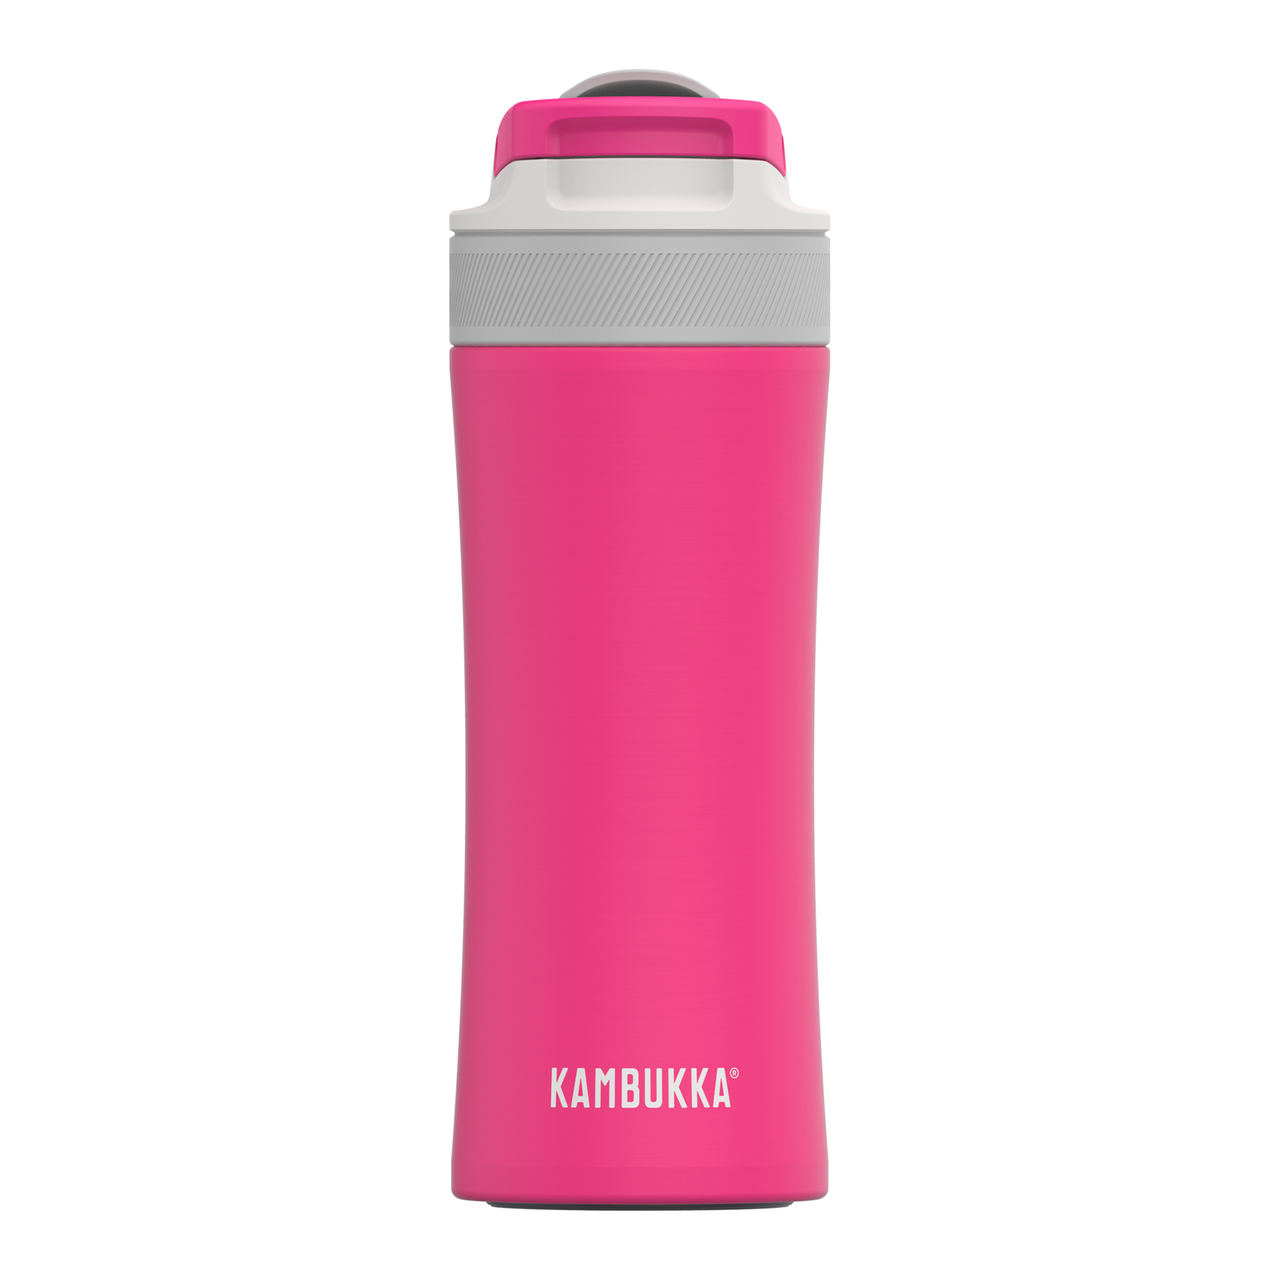 BPA FREE SS INSULATED WATER BOTTLE WITH SPOUT LID